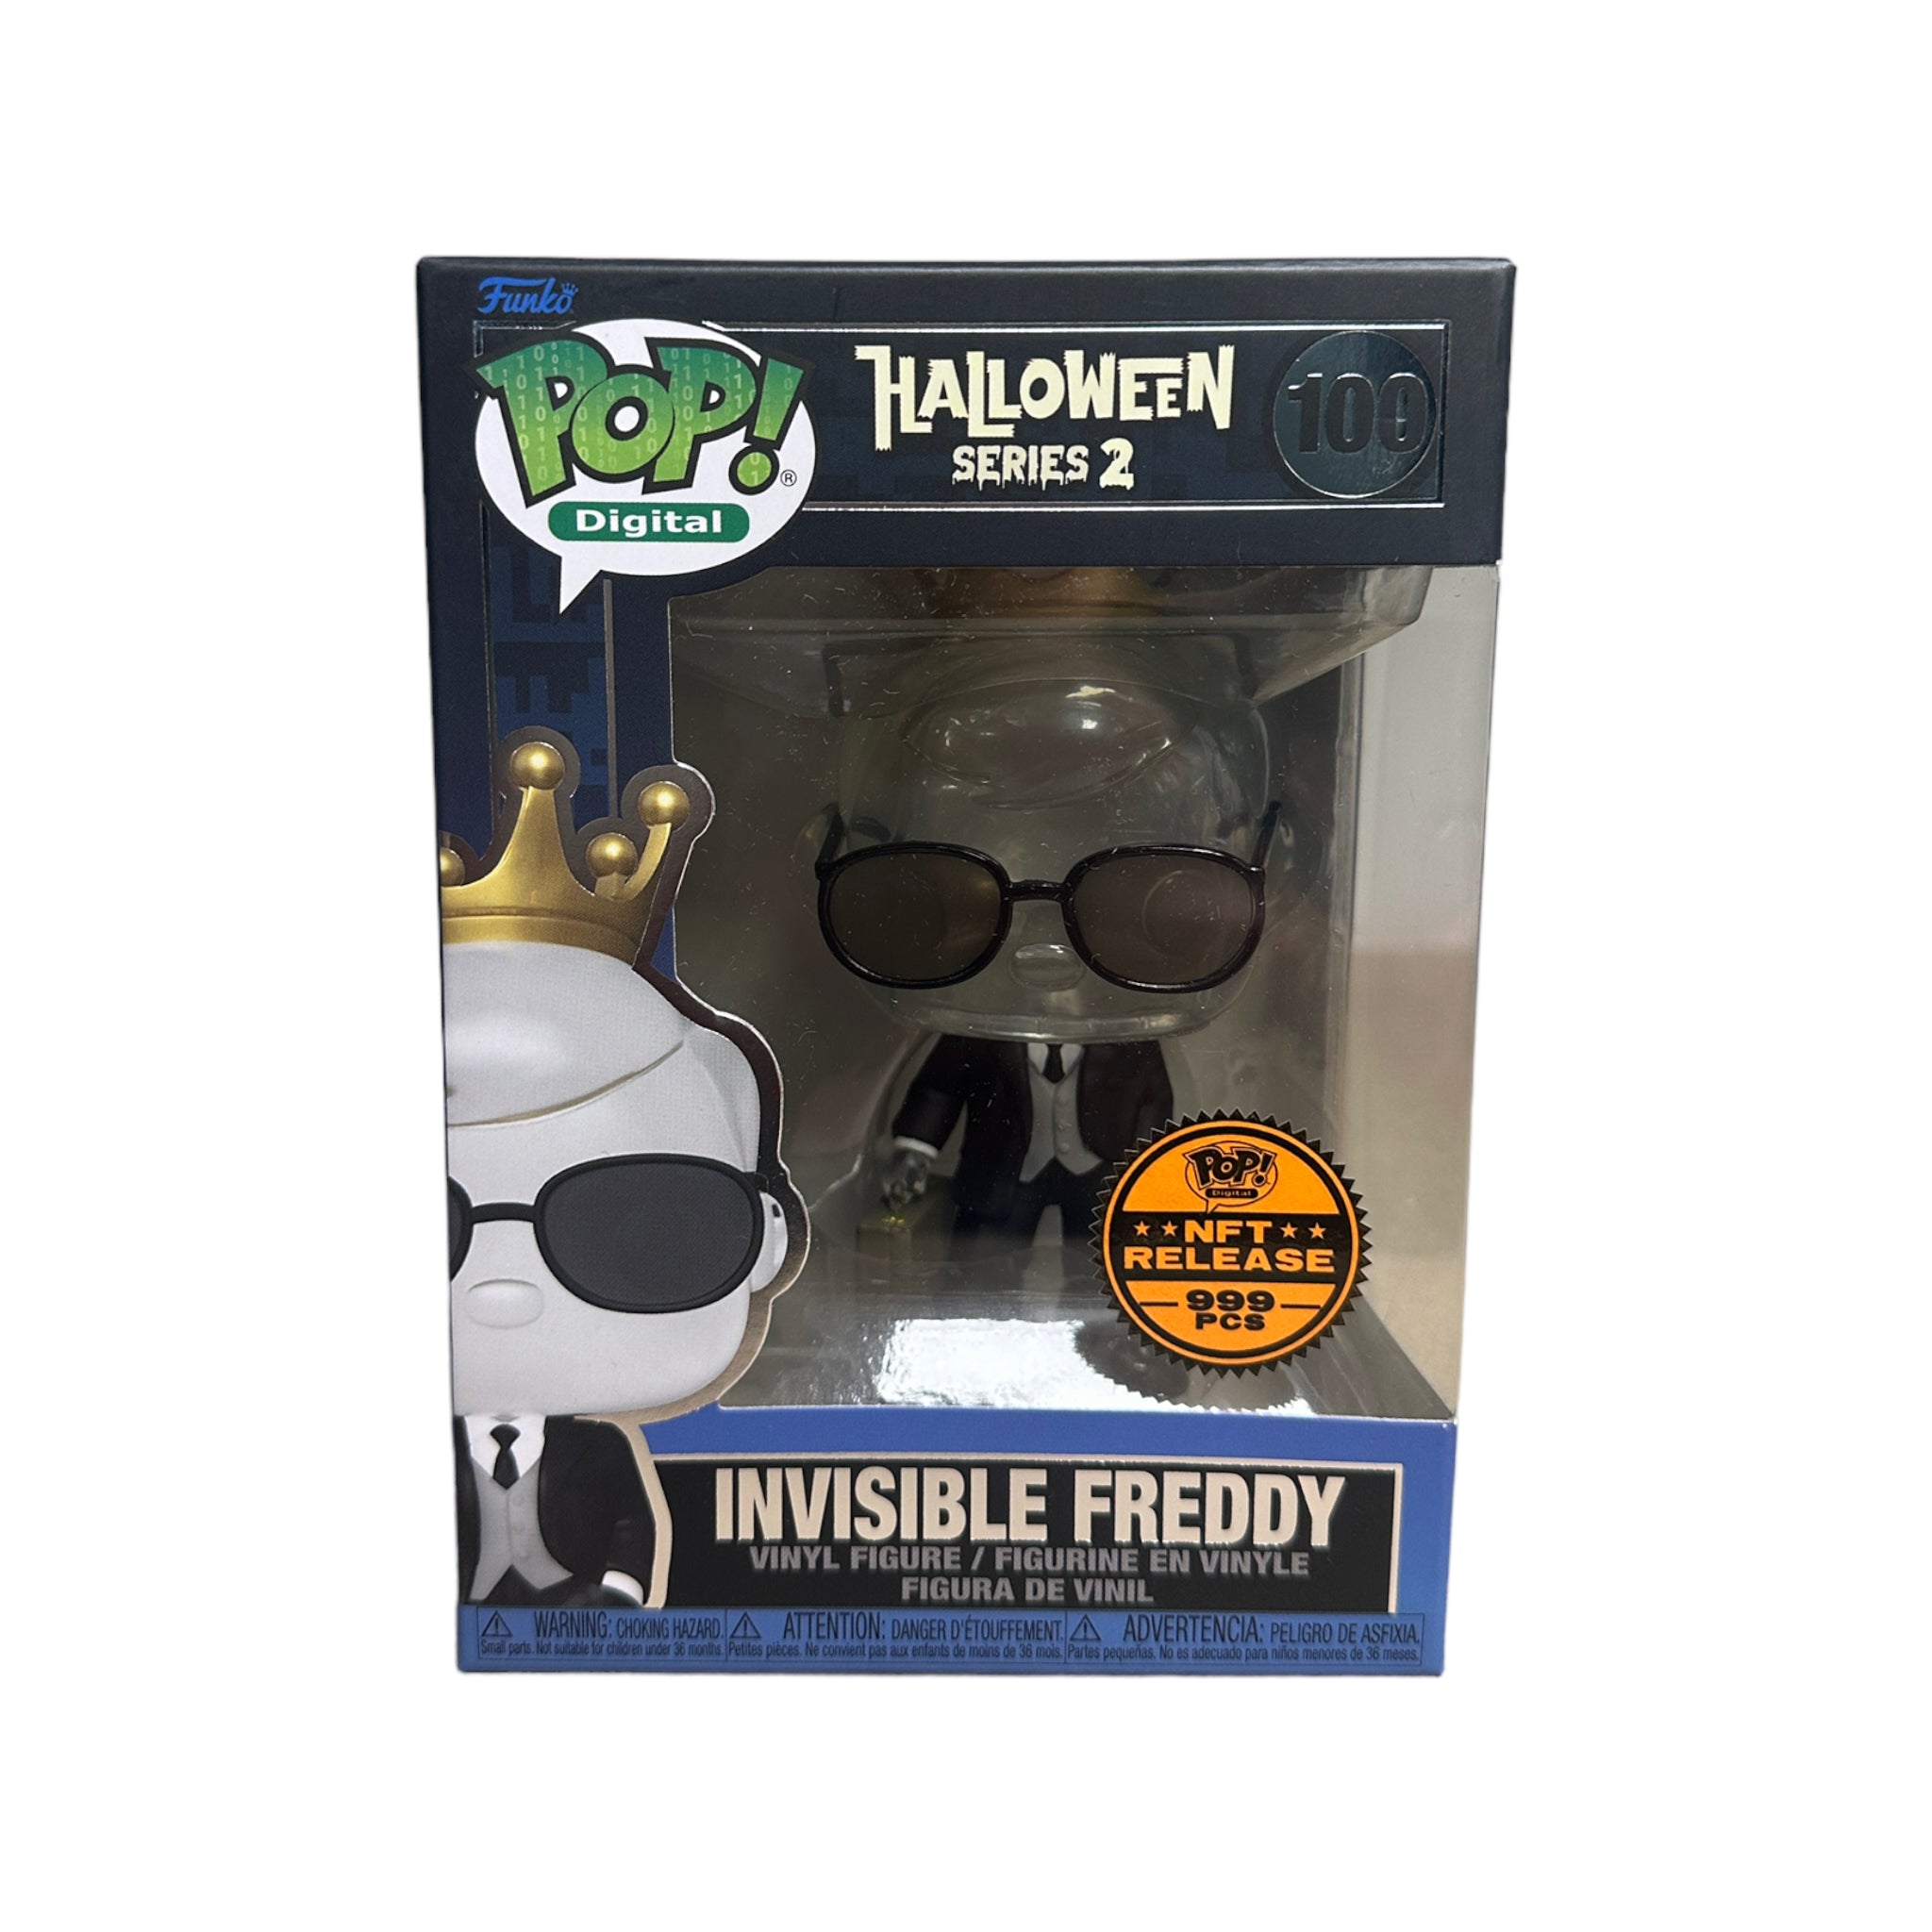 Invisible Freddy #100 Funko Pop! - Halloween Series 2 - NFT Release Exclusive LE999 Pcs - Condition 9/10